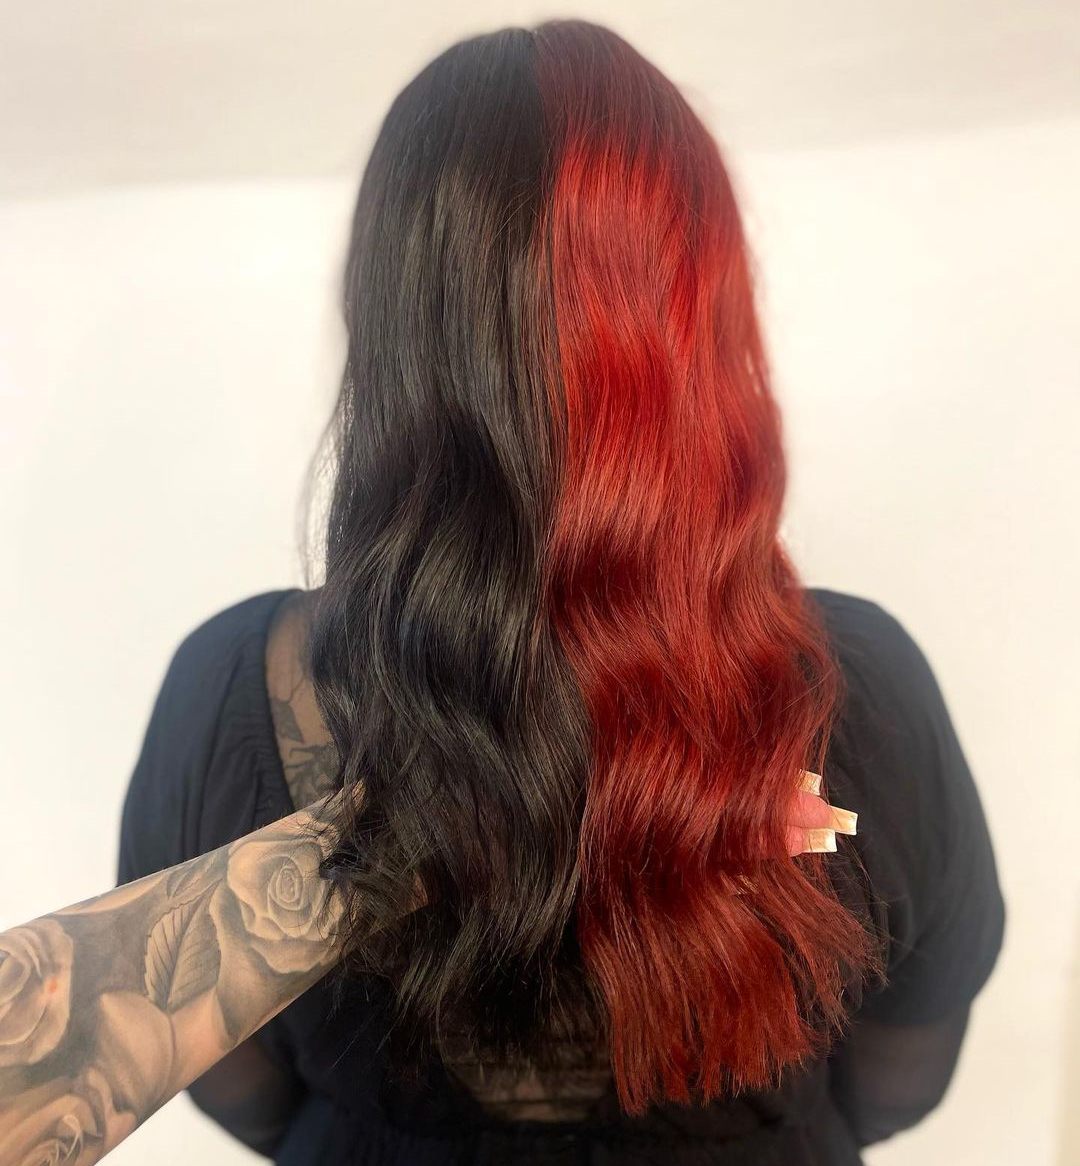 Black and red split hair